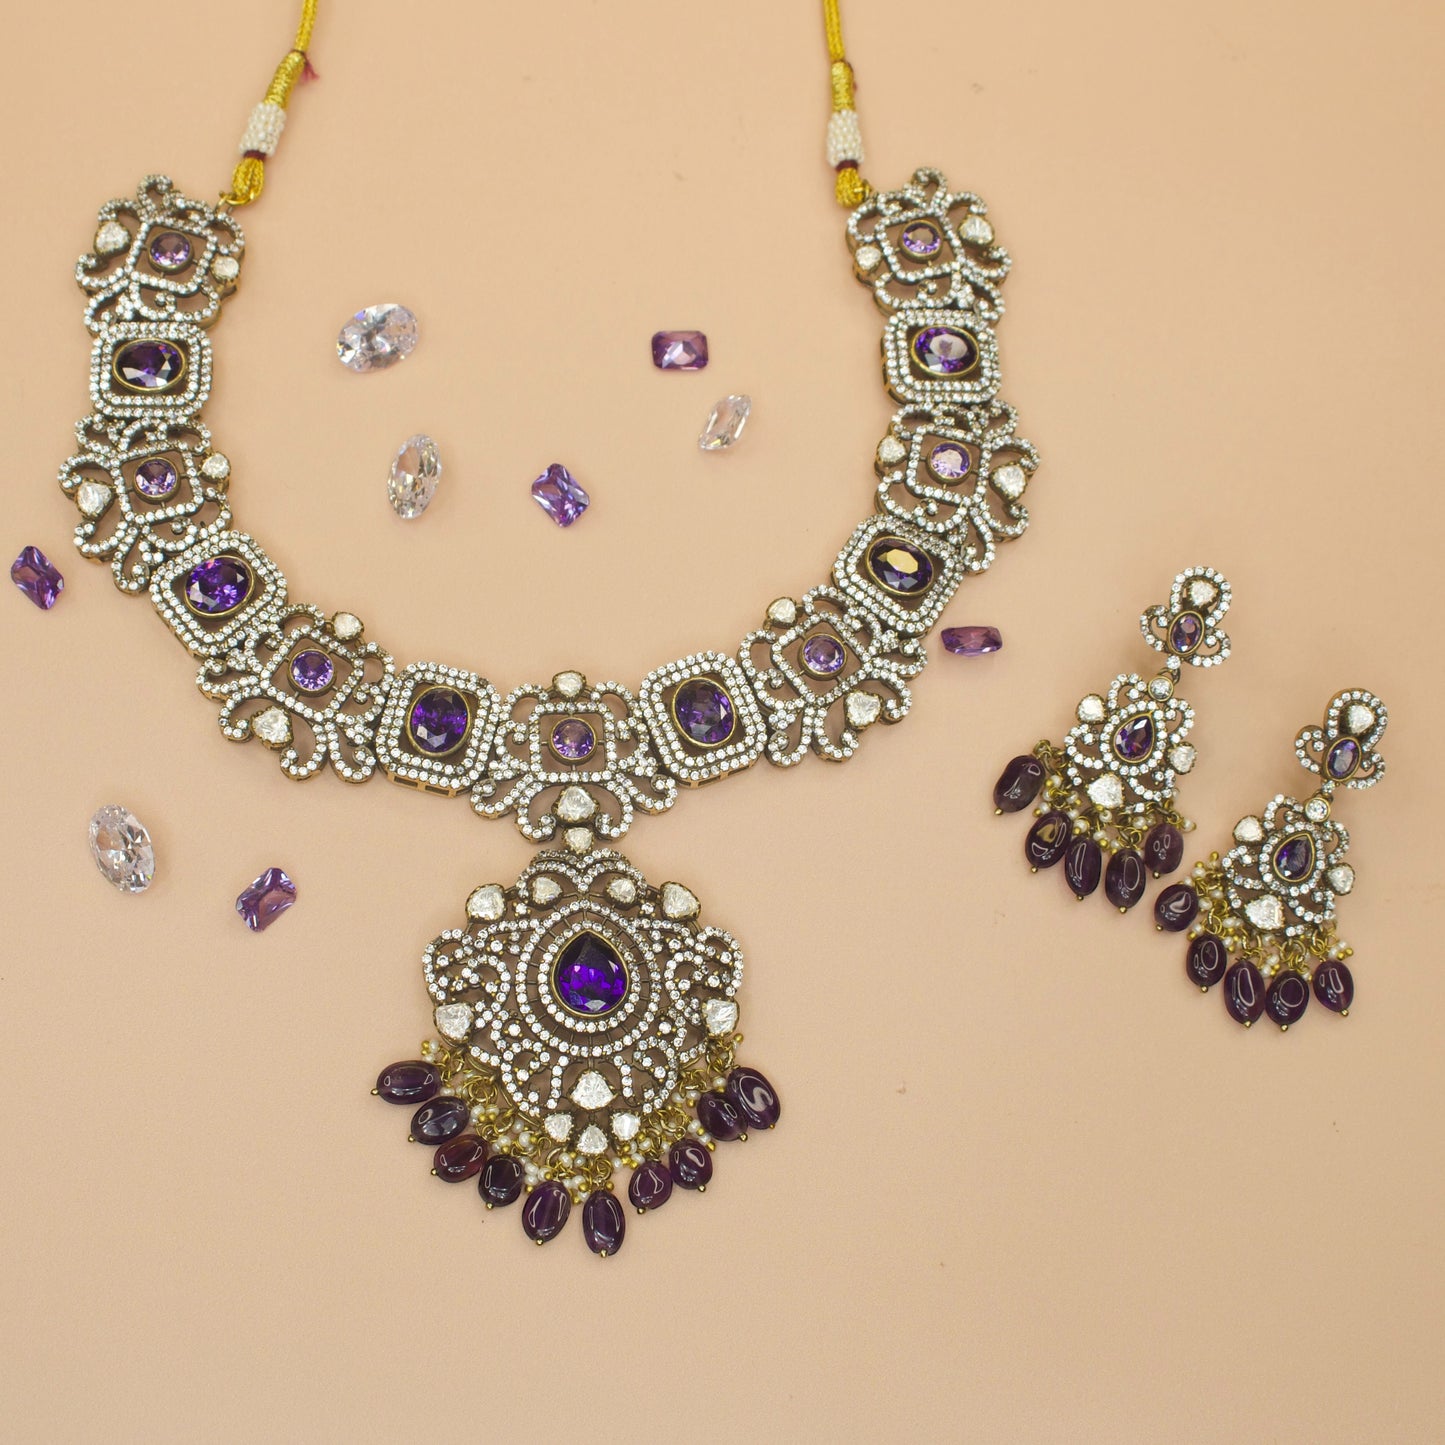 Robust Victorian Necklace Set with zircon, polki, pearls, and beads, including matching earrings. This Victorian Jewellery is available in Red & Purple colour variants. 